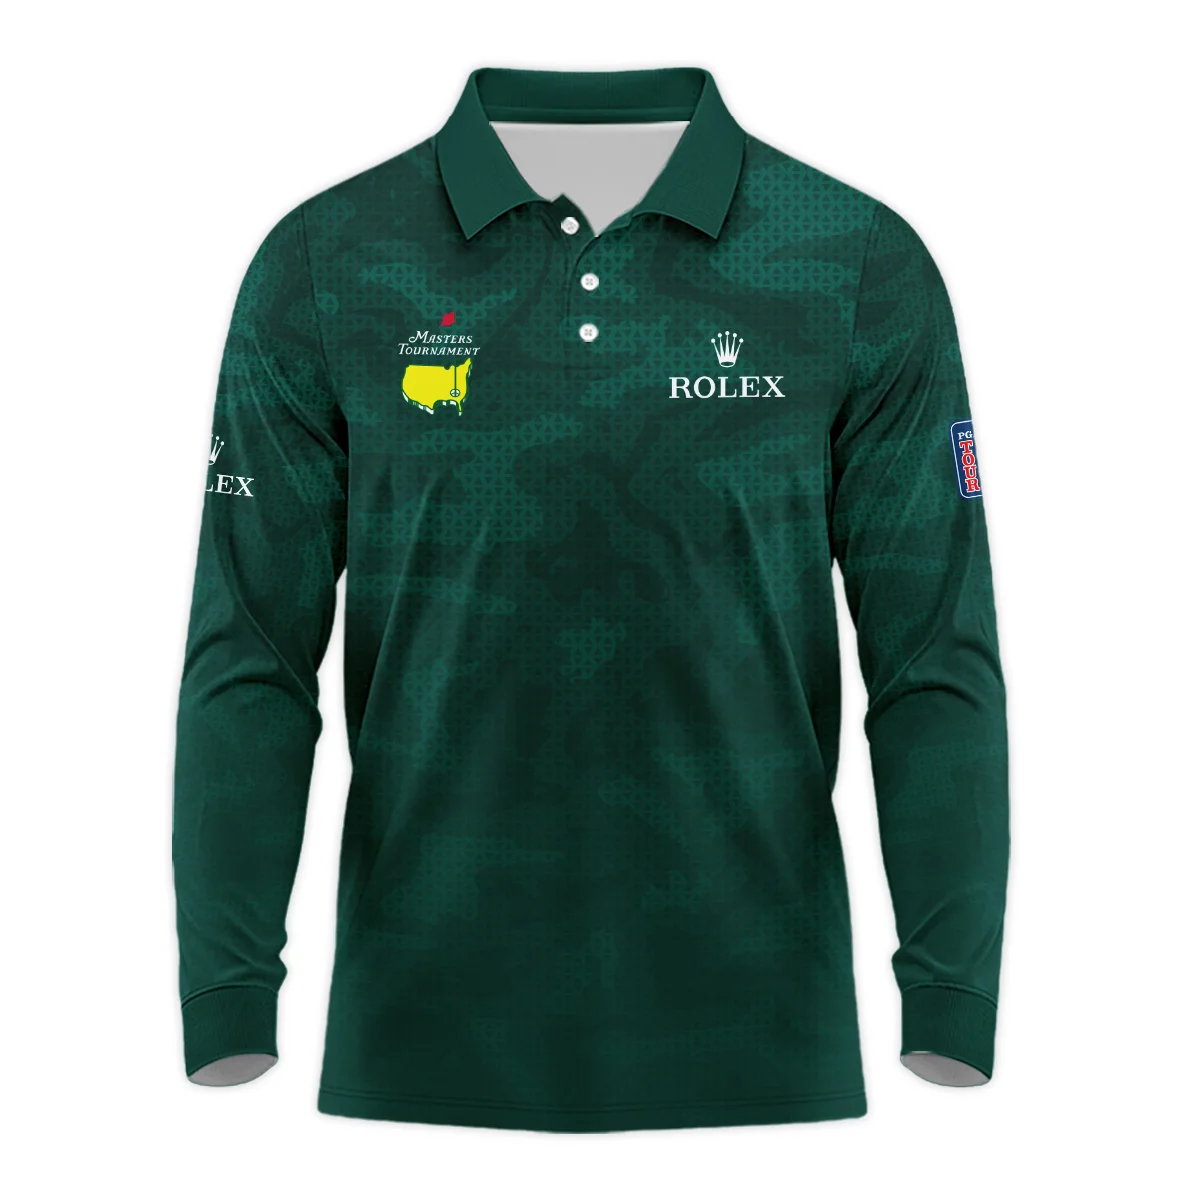 Masters Tournament Rolex Camo Sport Green Abstract Vneck Long Polo Shirt Style Classic Long Polo Shirt For Men